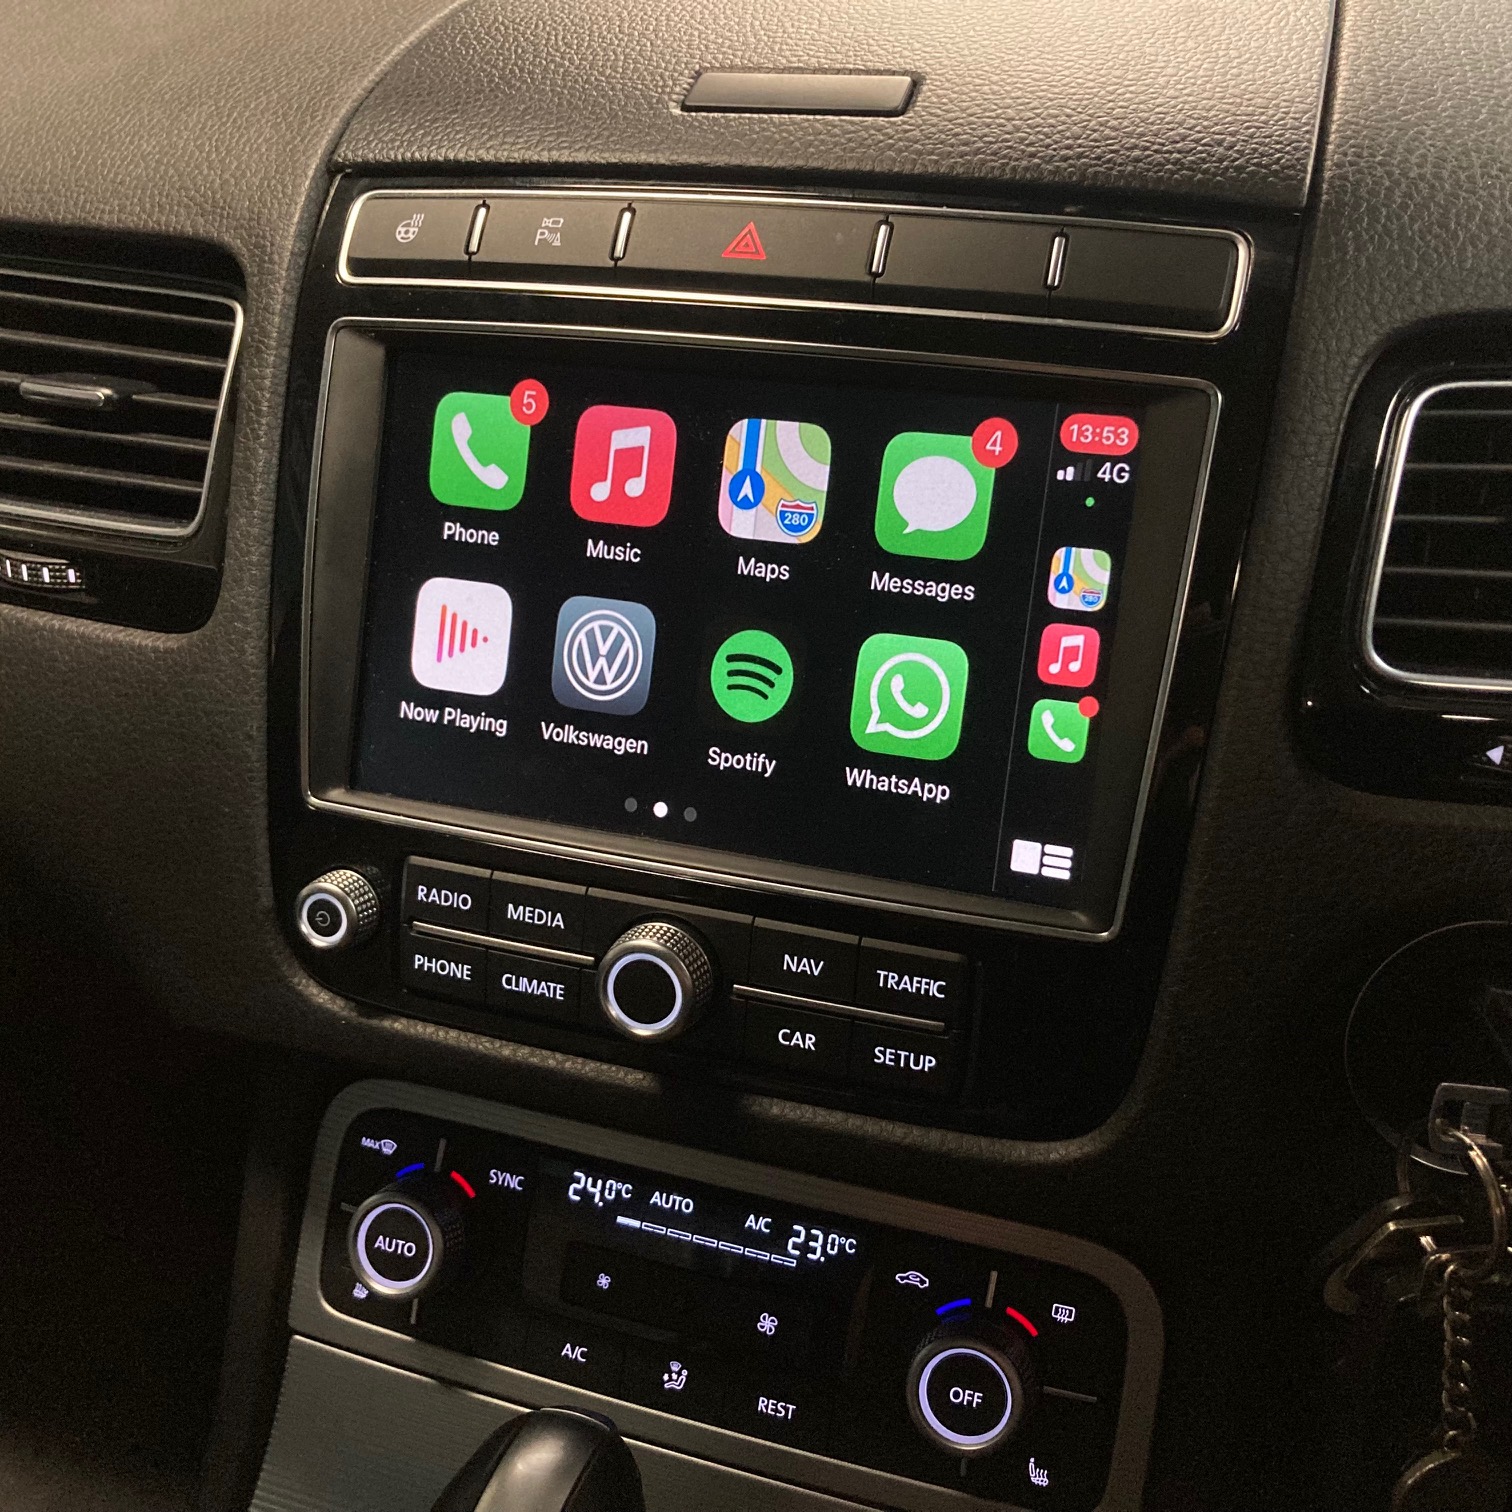 Volkswagon-2: Touareg 8" - OEM upgrade with Wireless Apple CarPlay and Android Auto